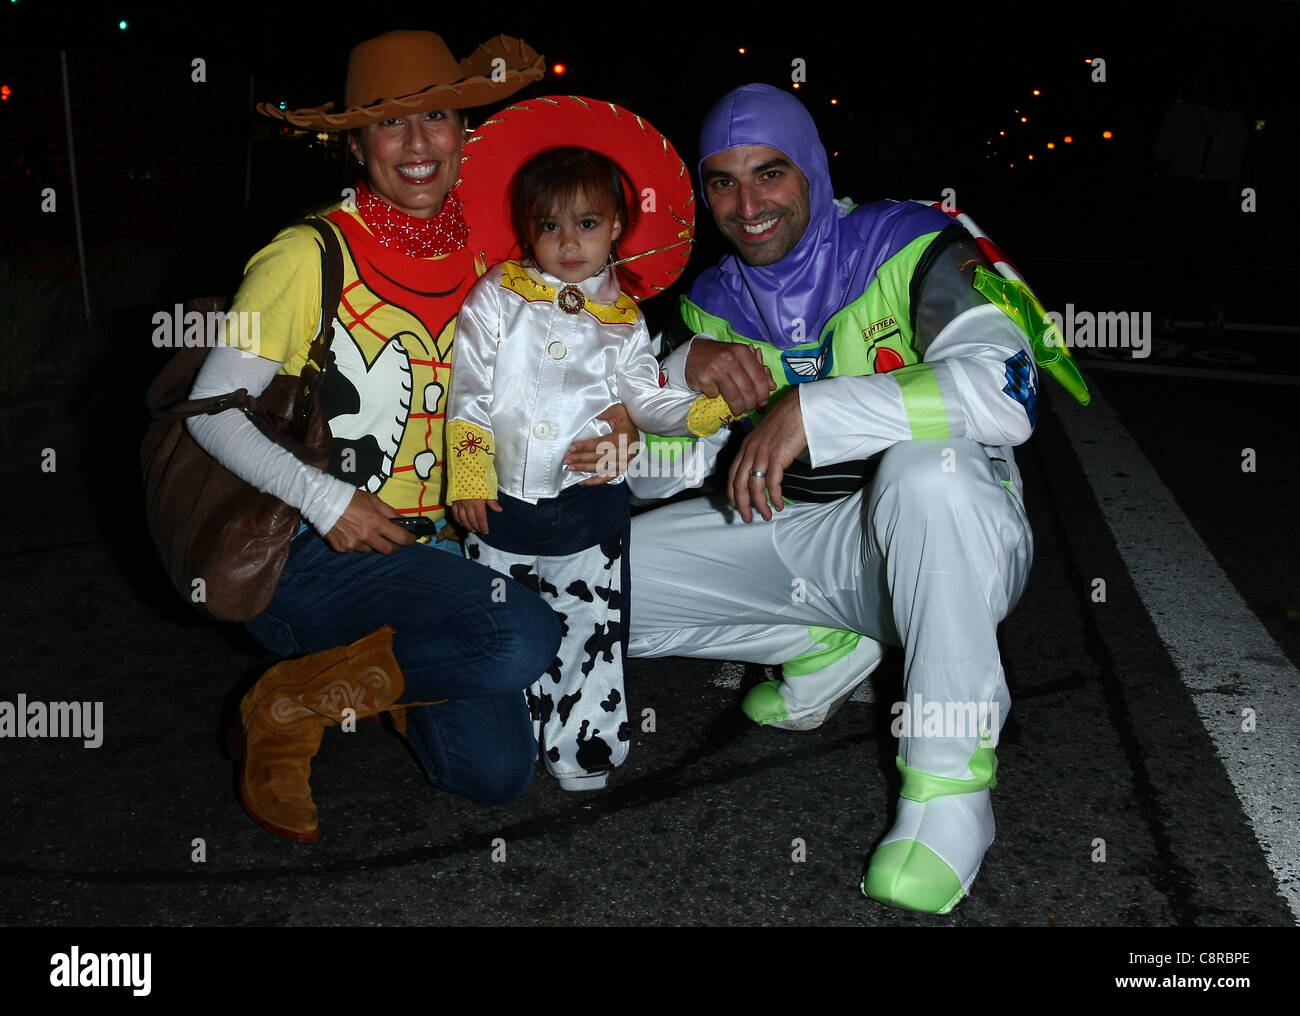 TOY STORY FAMILY COSTUMES 2011 WEST HOLLYWOOD COSTUME CARNAVAL LOS ANGELES  CALIFORNIA USA 31 October 2011 Stock Photo - Alamy